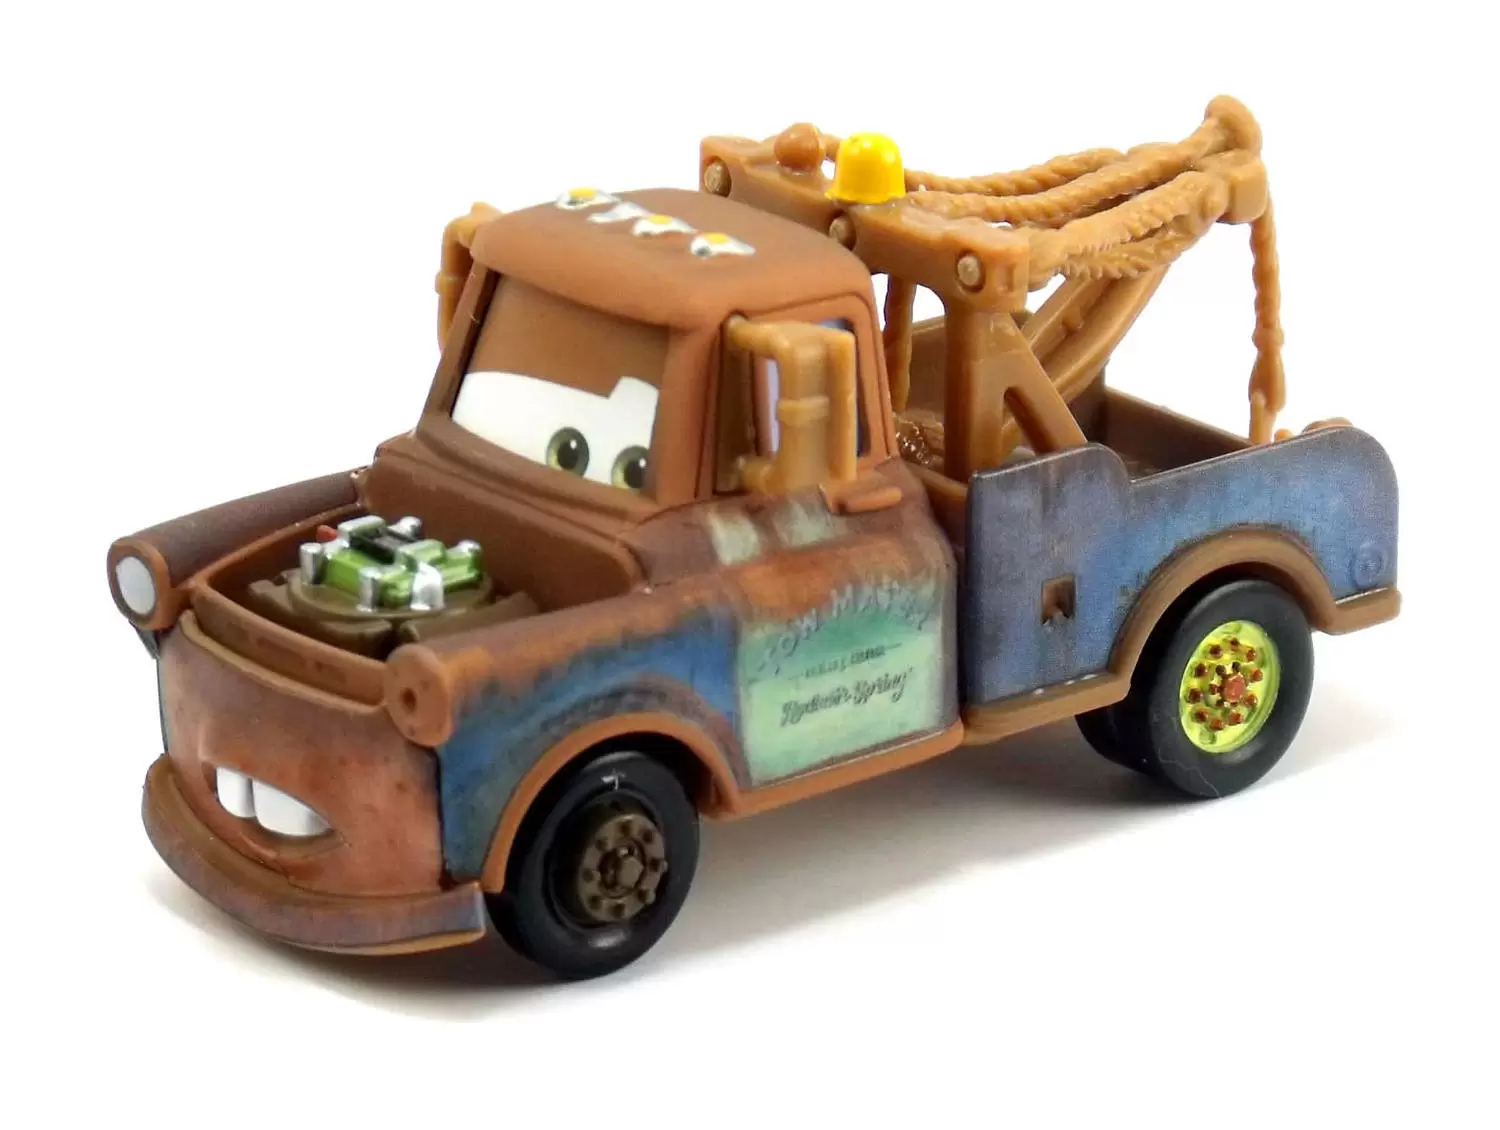 Cars 2 models - You  the bomb Mater (version 1)